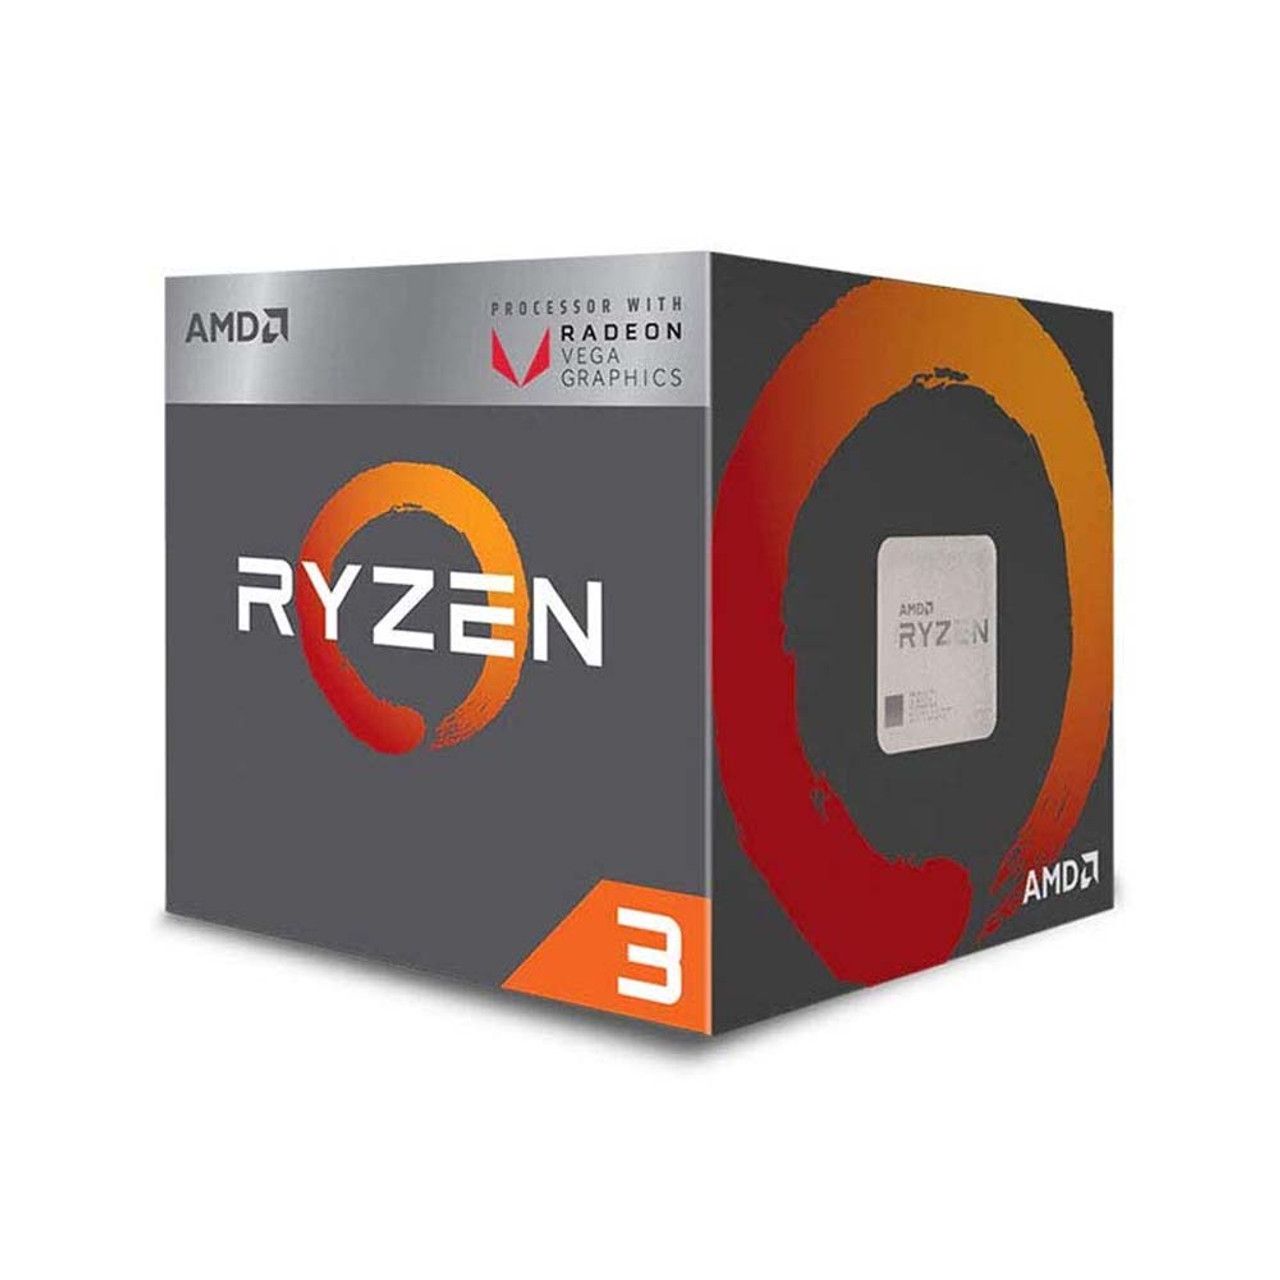 AMD CPU Desktop Ryzen 3 4C/4T 3200G (4.0GHz,6MB,65W,AM4) box, RX Vega 8 Graphics, with Wraith Stealth cooler_1